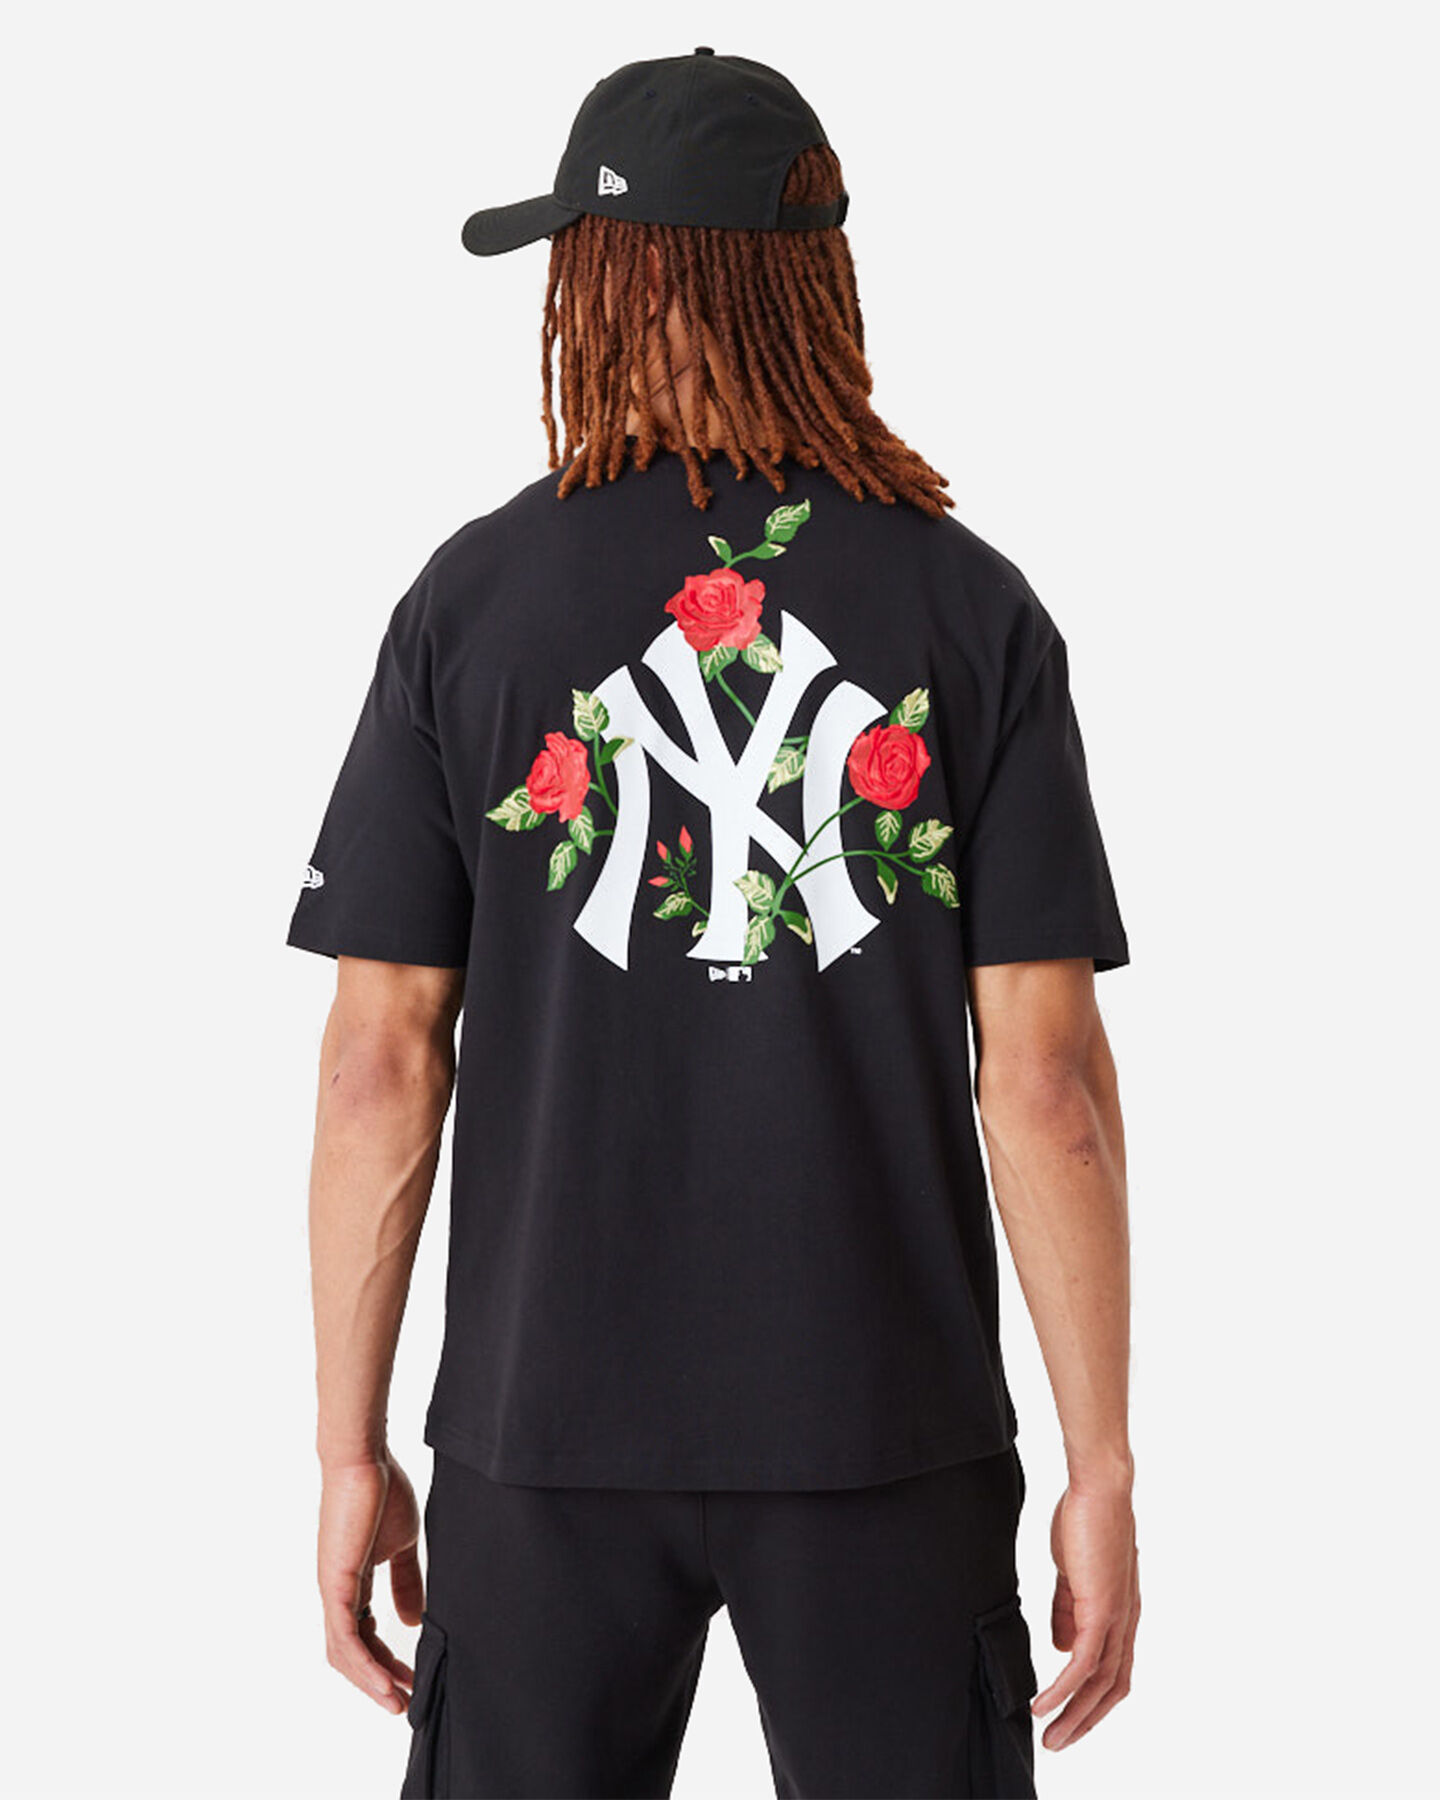  Maglia basket NEW ERA FLORAL NY YANKEES M S5546398 scatto 1